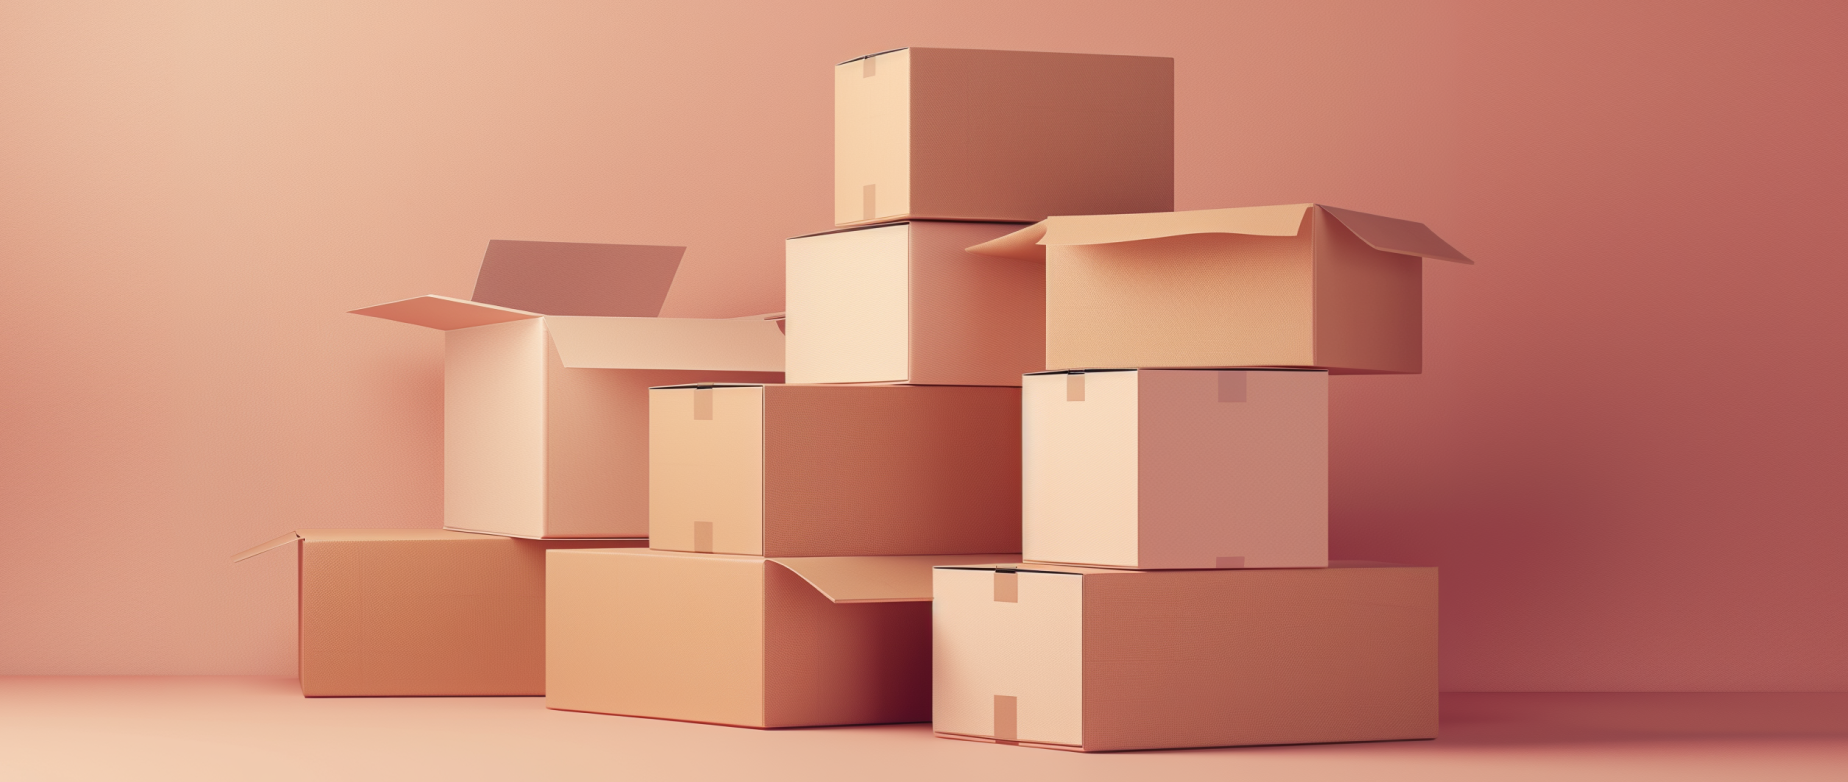 A large stack of shipping boxes on a light red background.